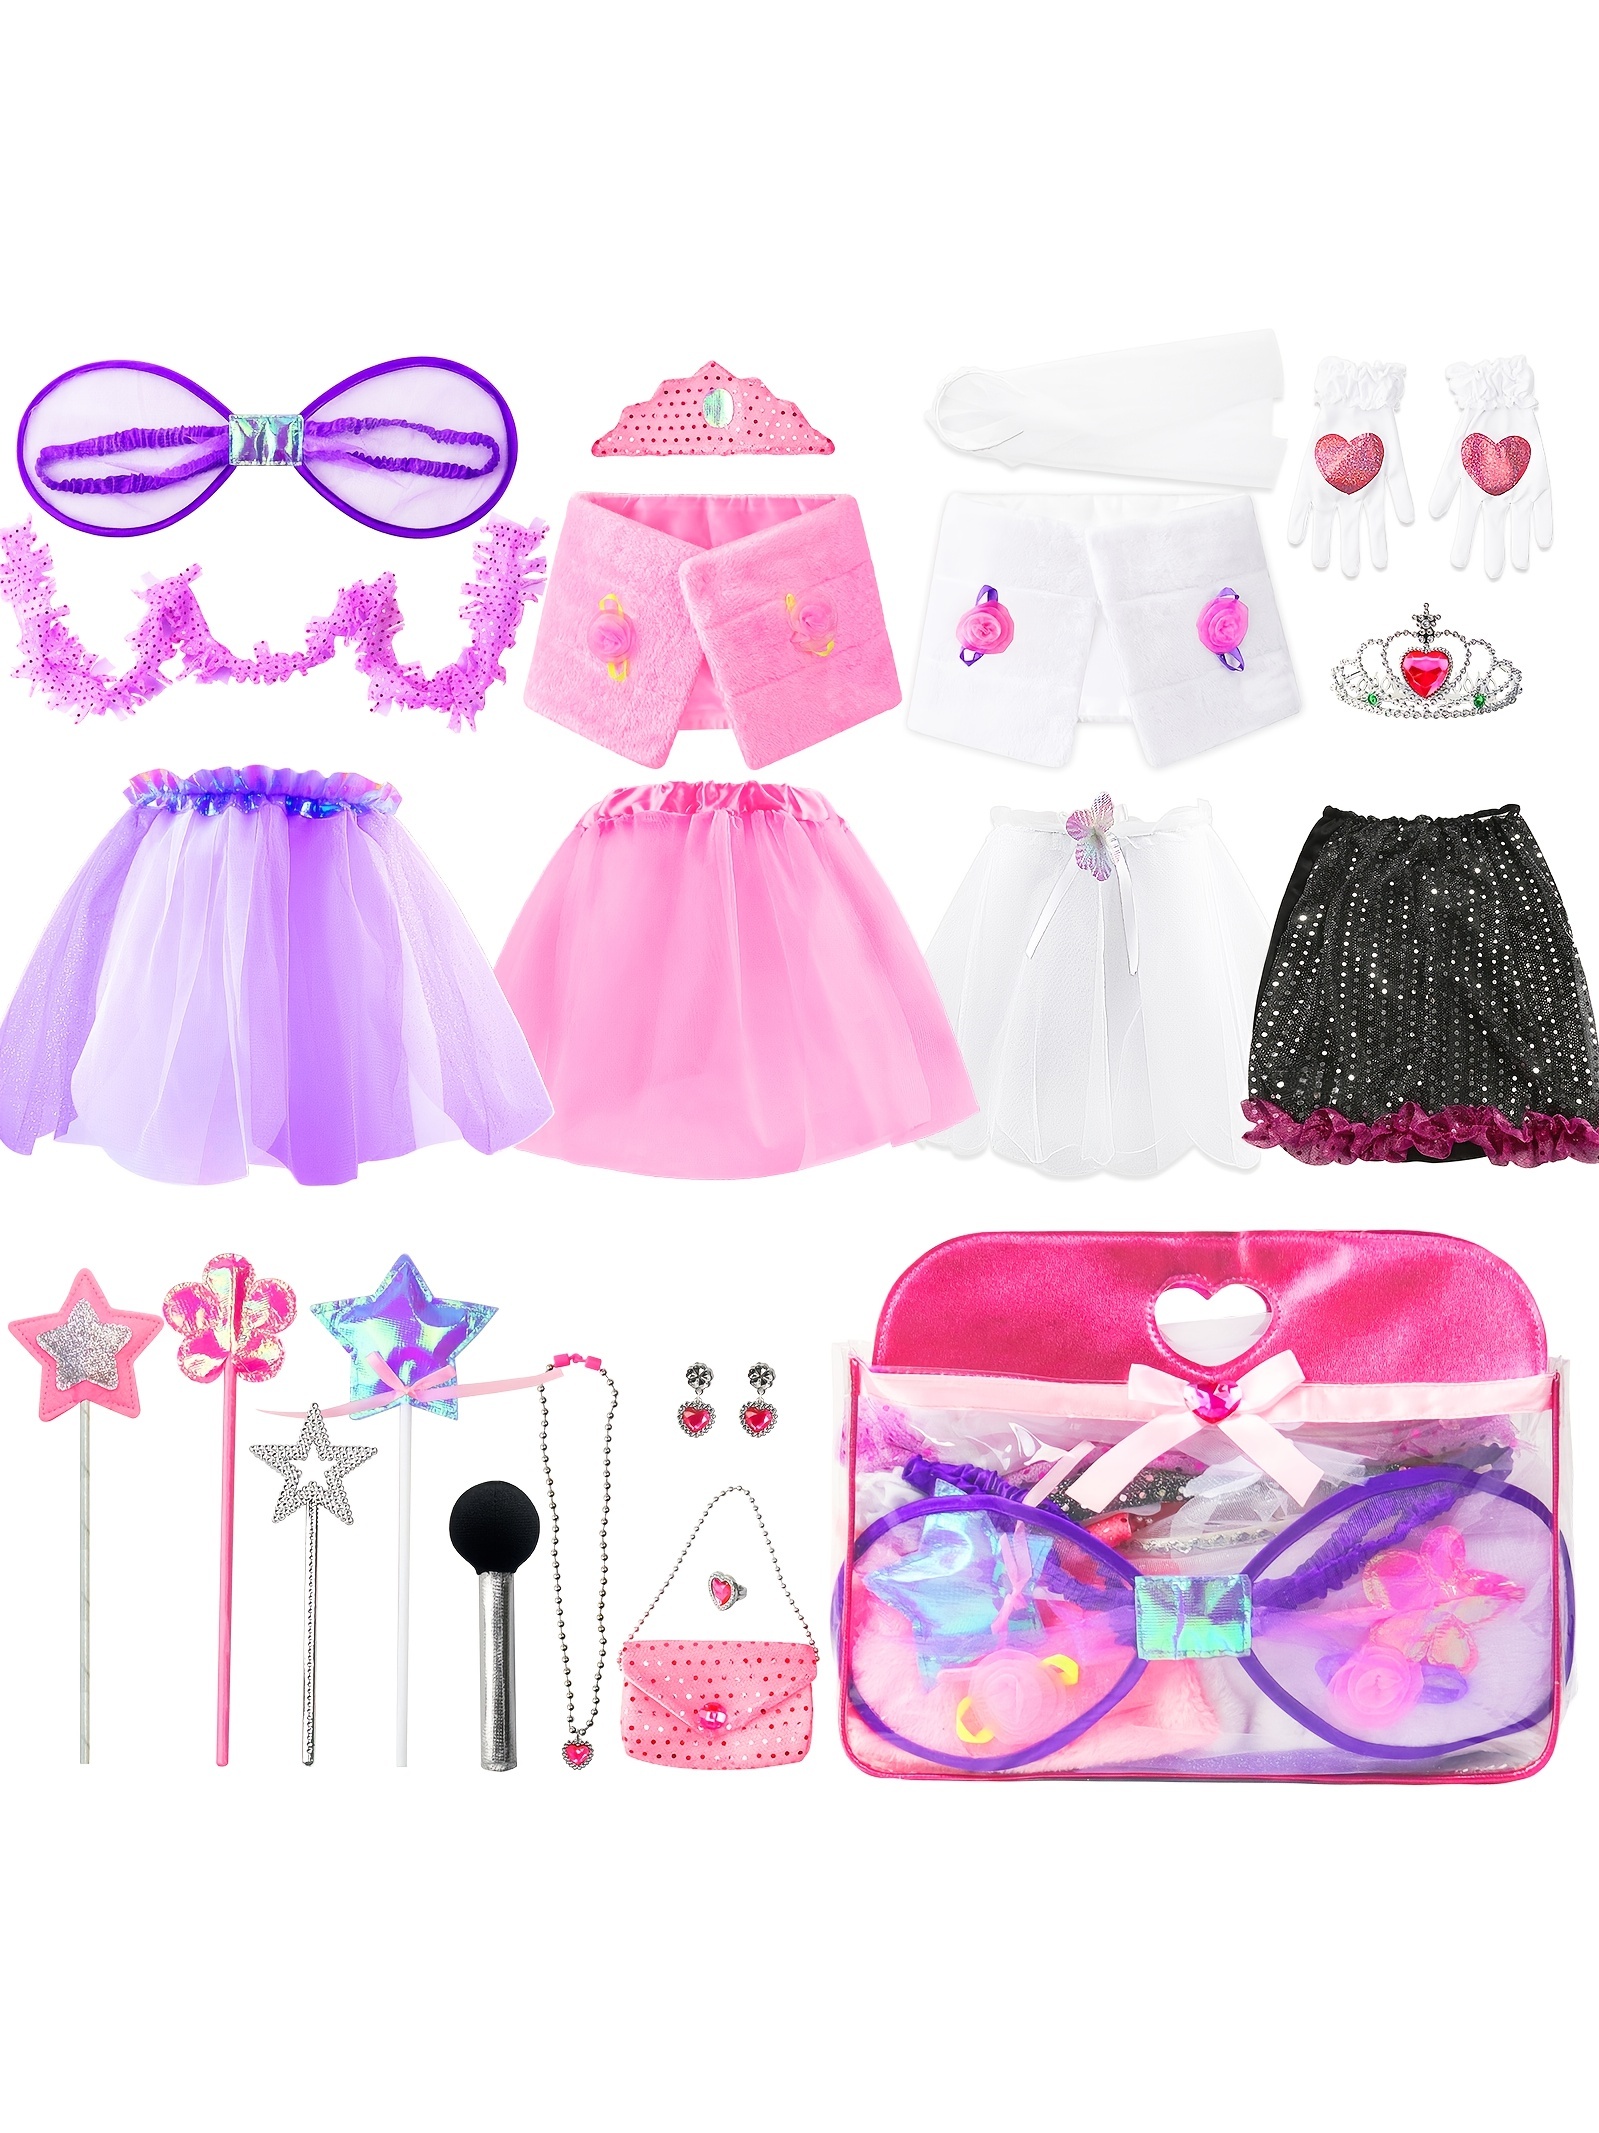 21pcs Girls Princess Dress Up Costume & Accessories Lowest Price & Free Shipping